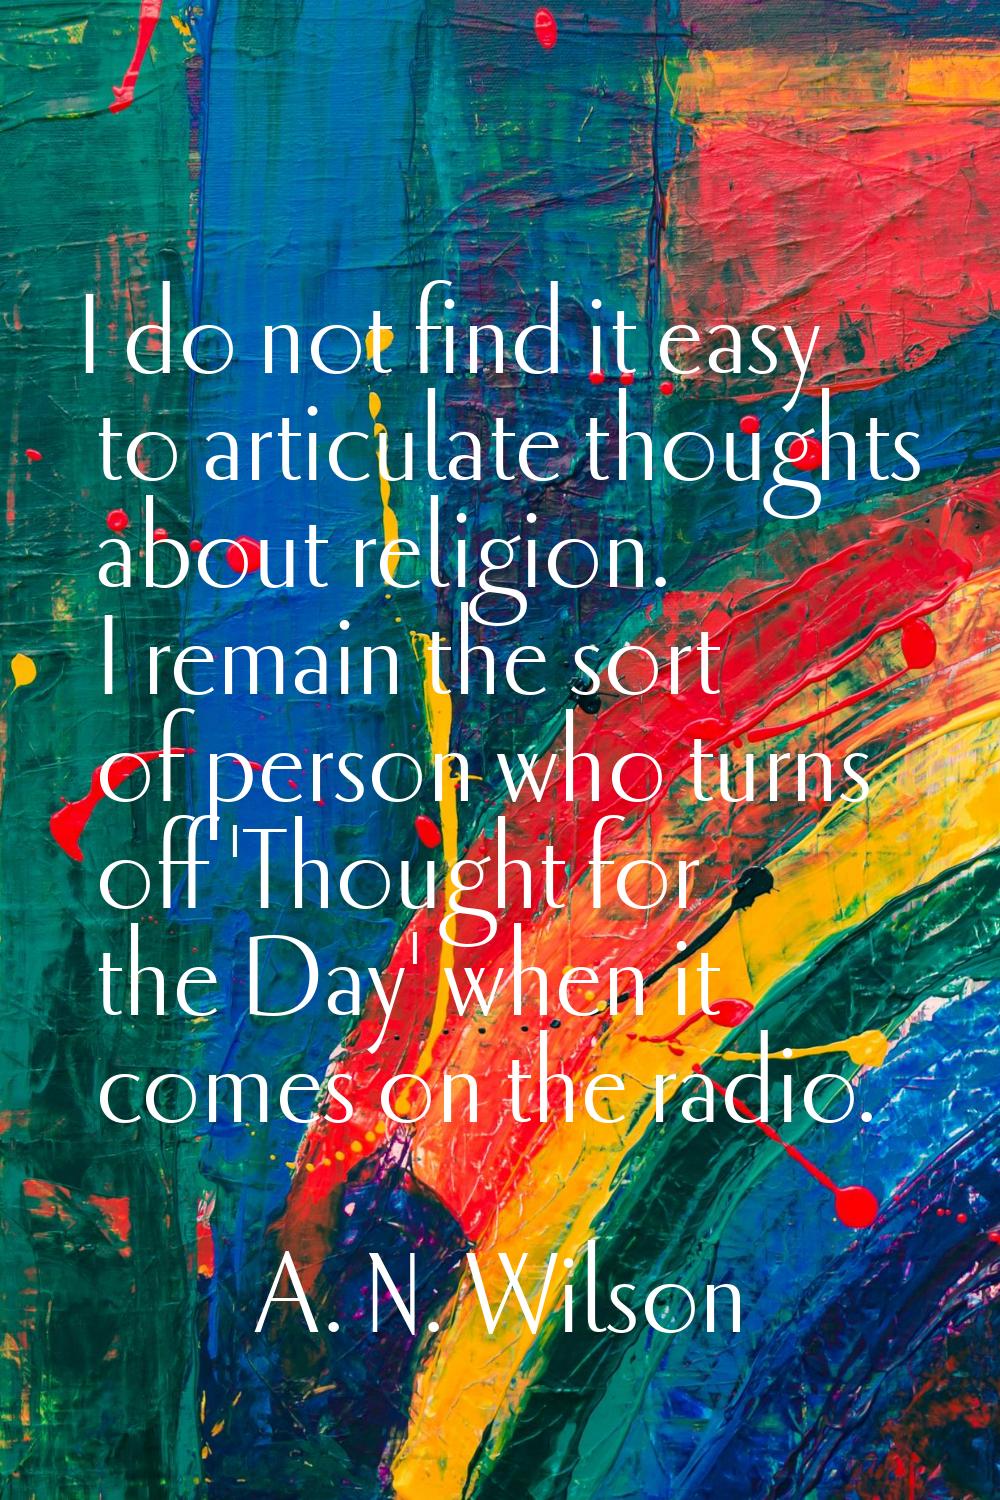 I do not find it easy to articulate thoughts about religion. I remain the sort of person who turns 